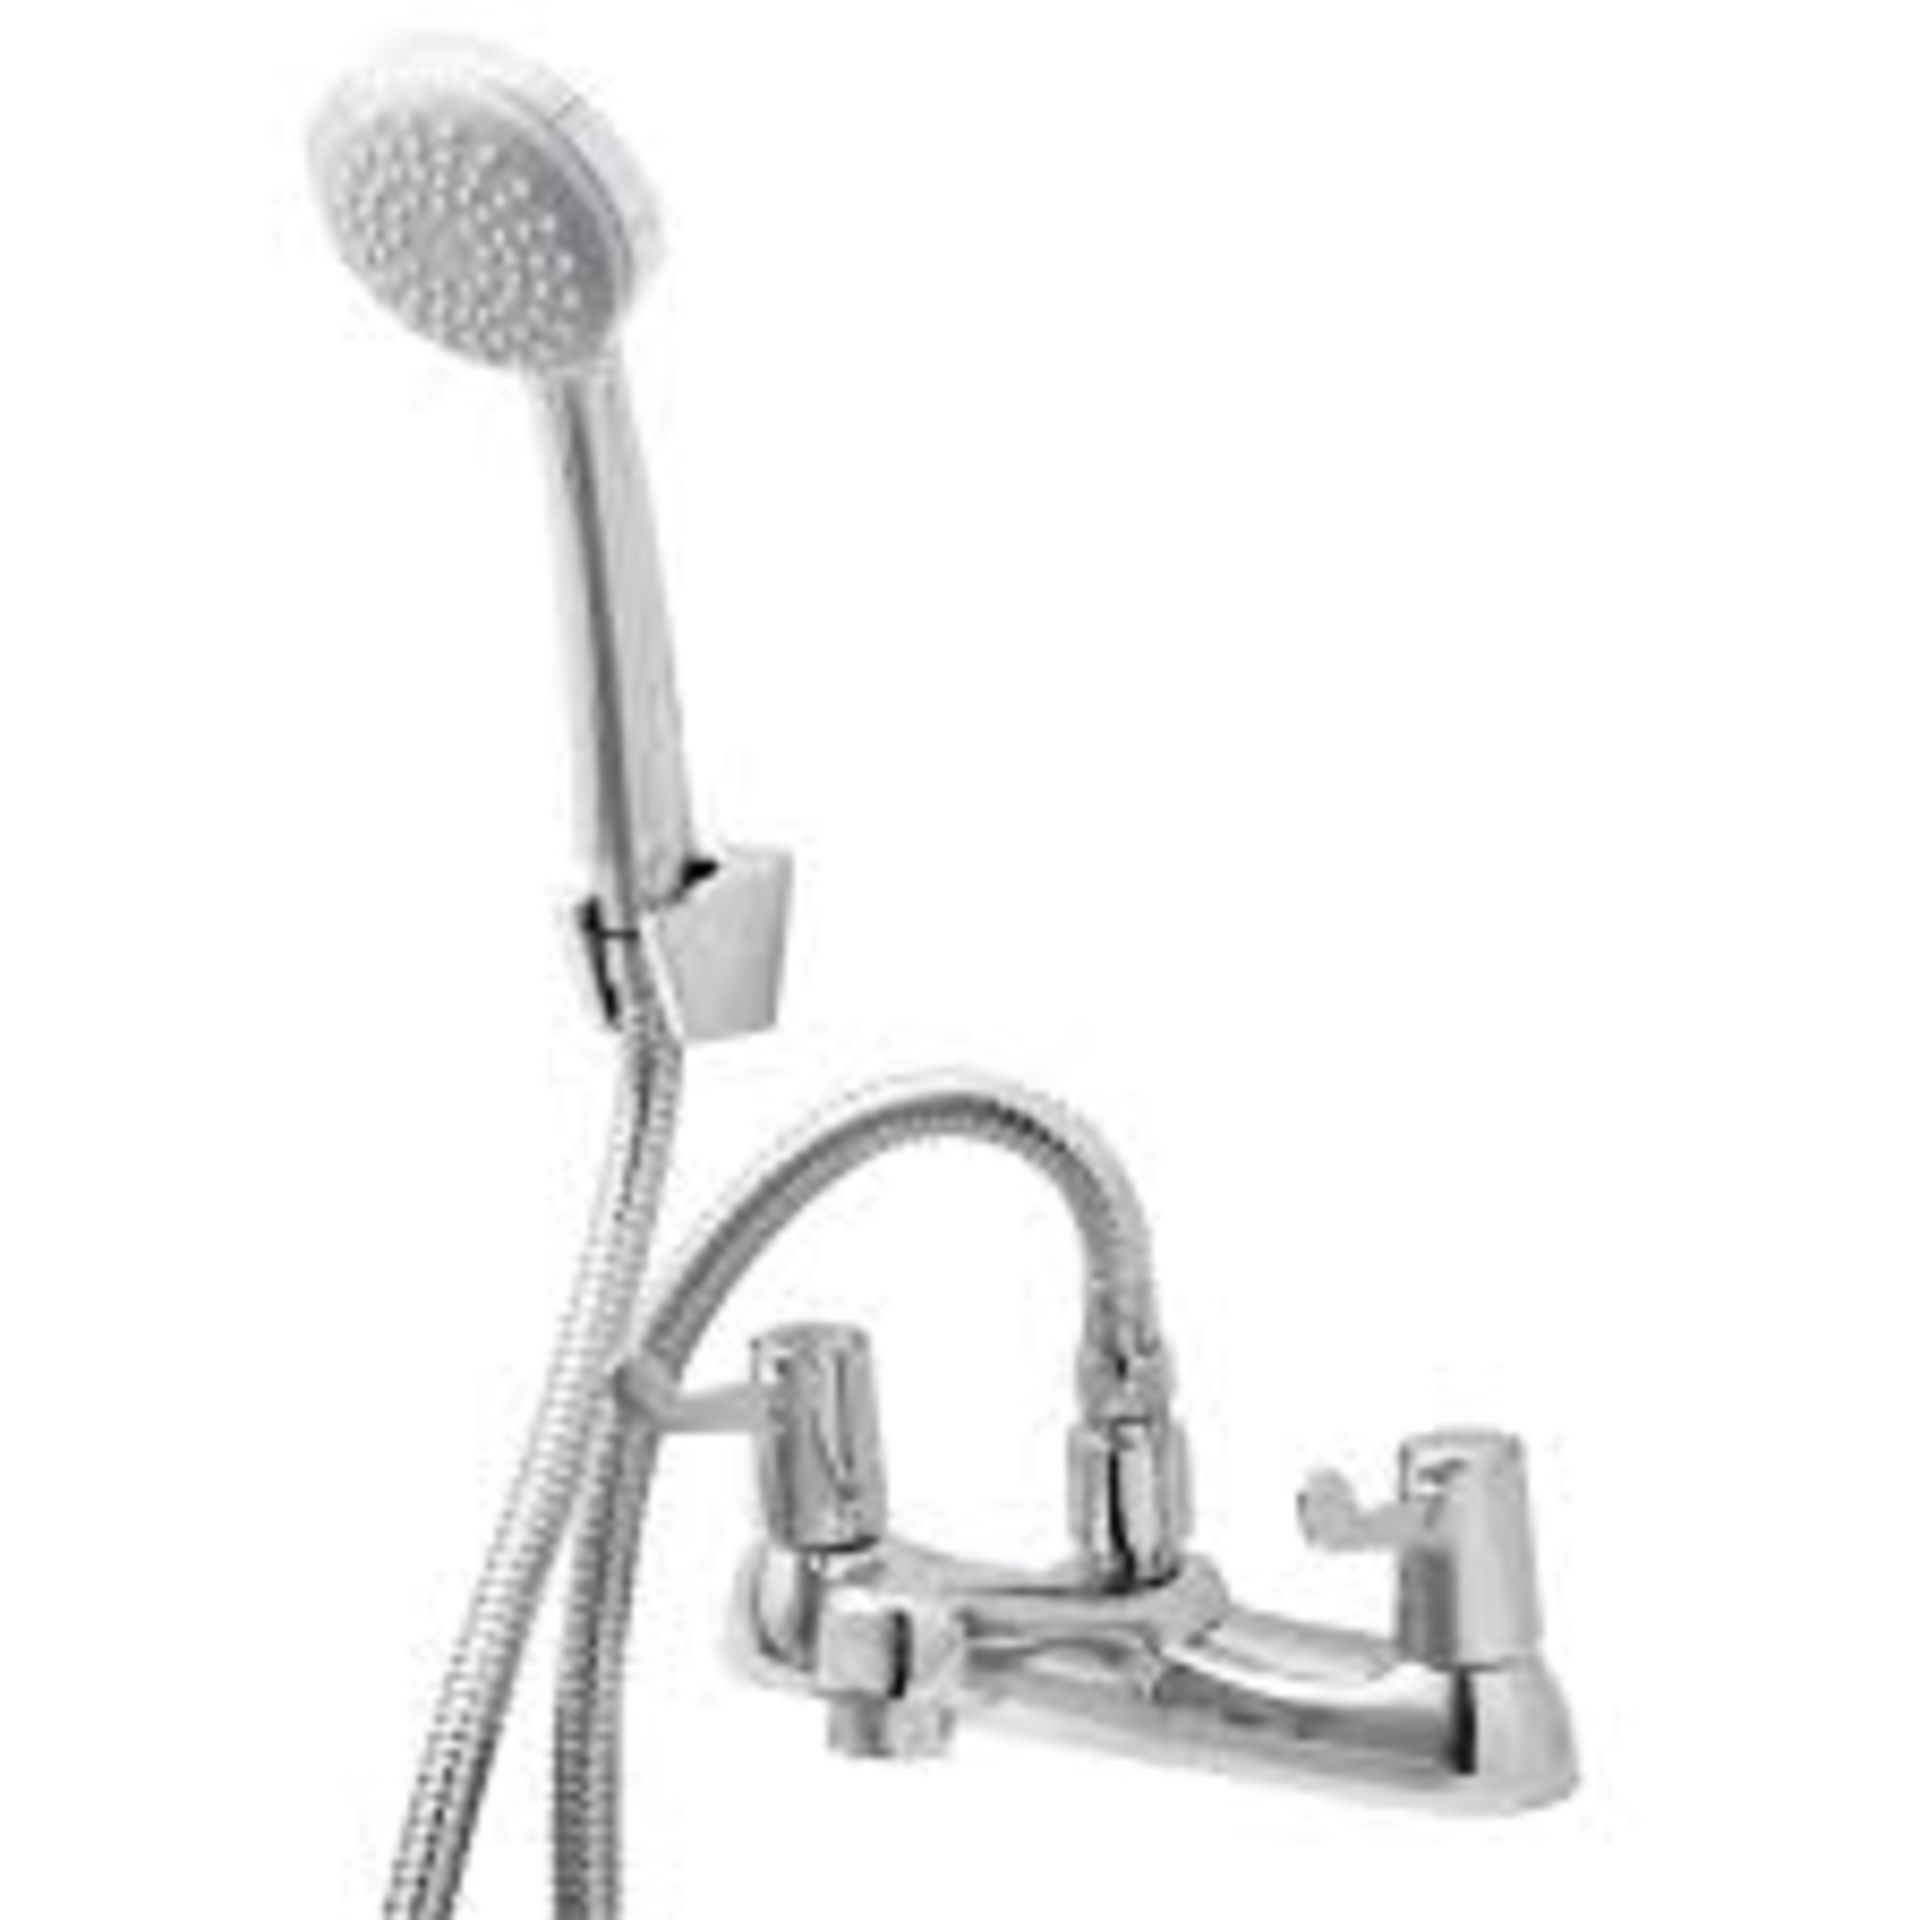 (REF2) Netley Chrome plated Universal bath shower mixer tap. This traditional style chrome bath...